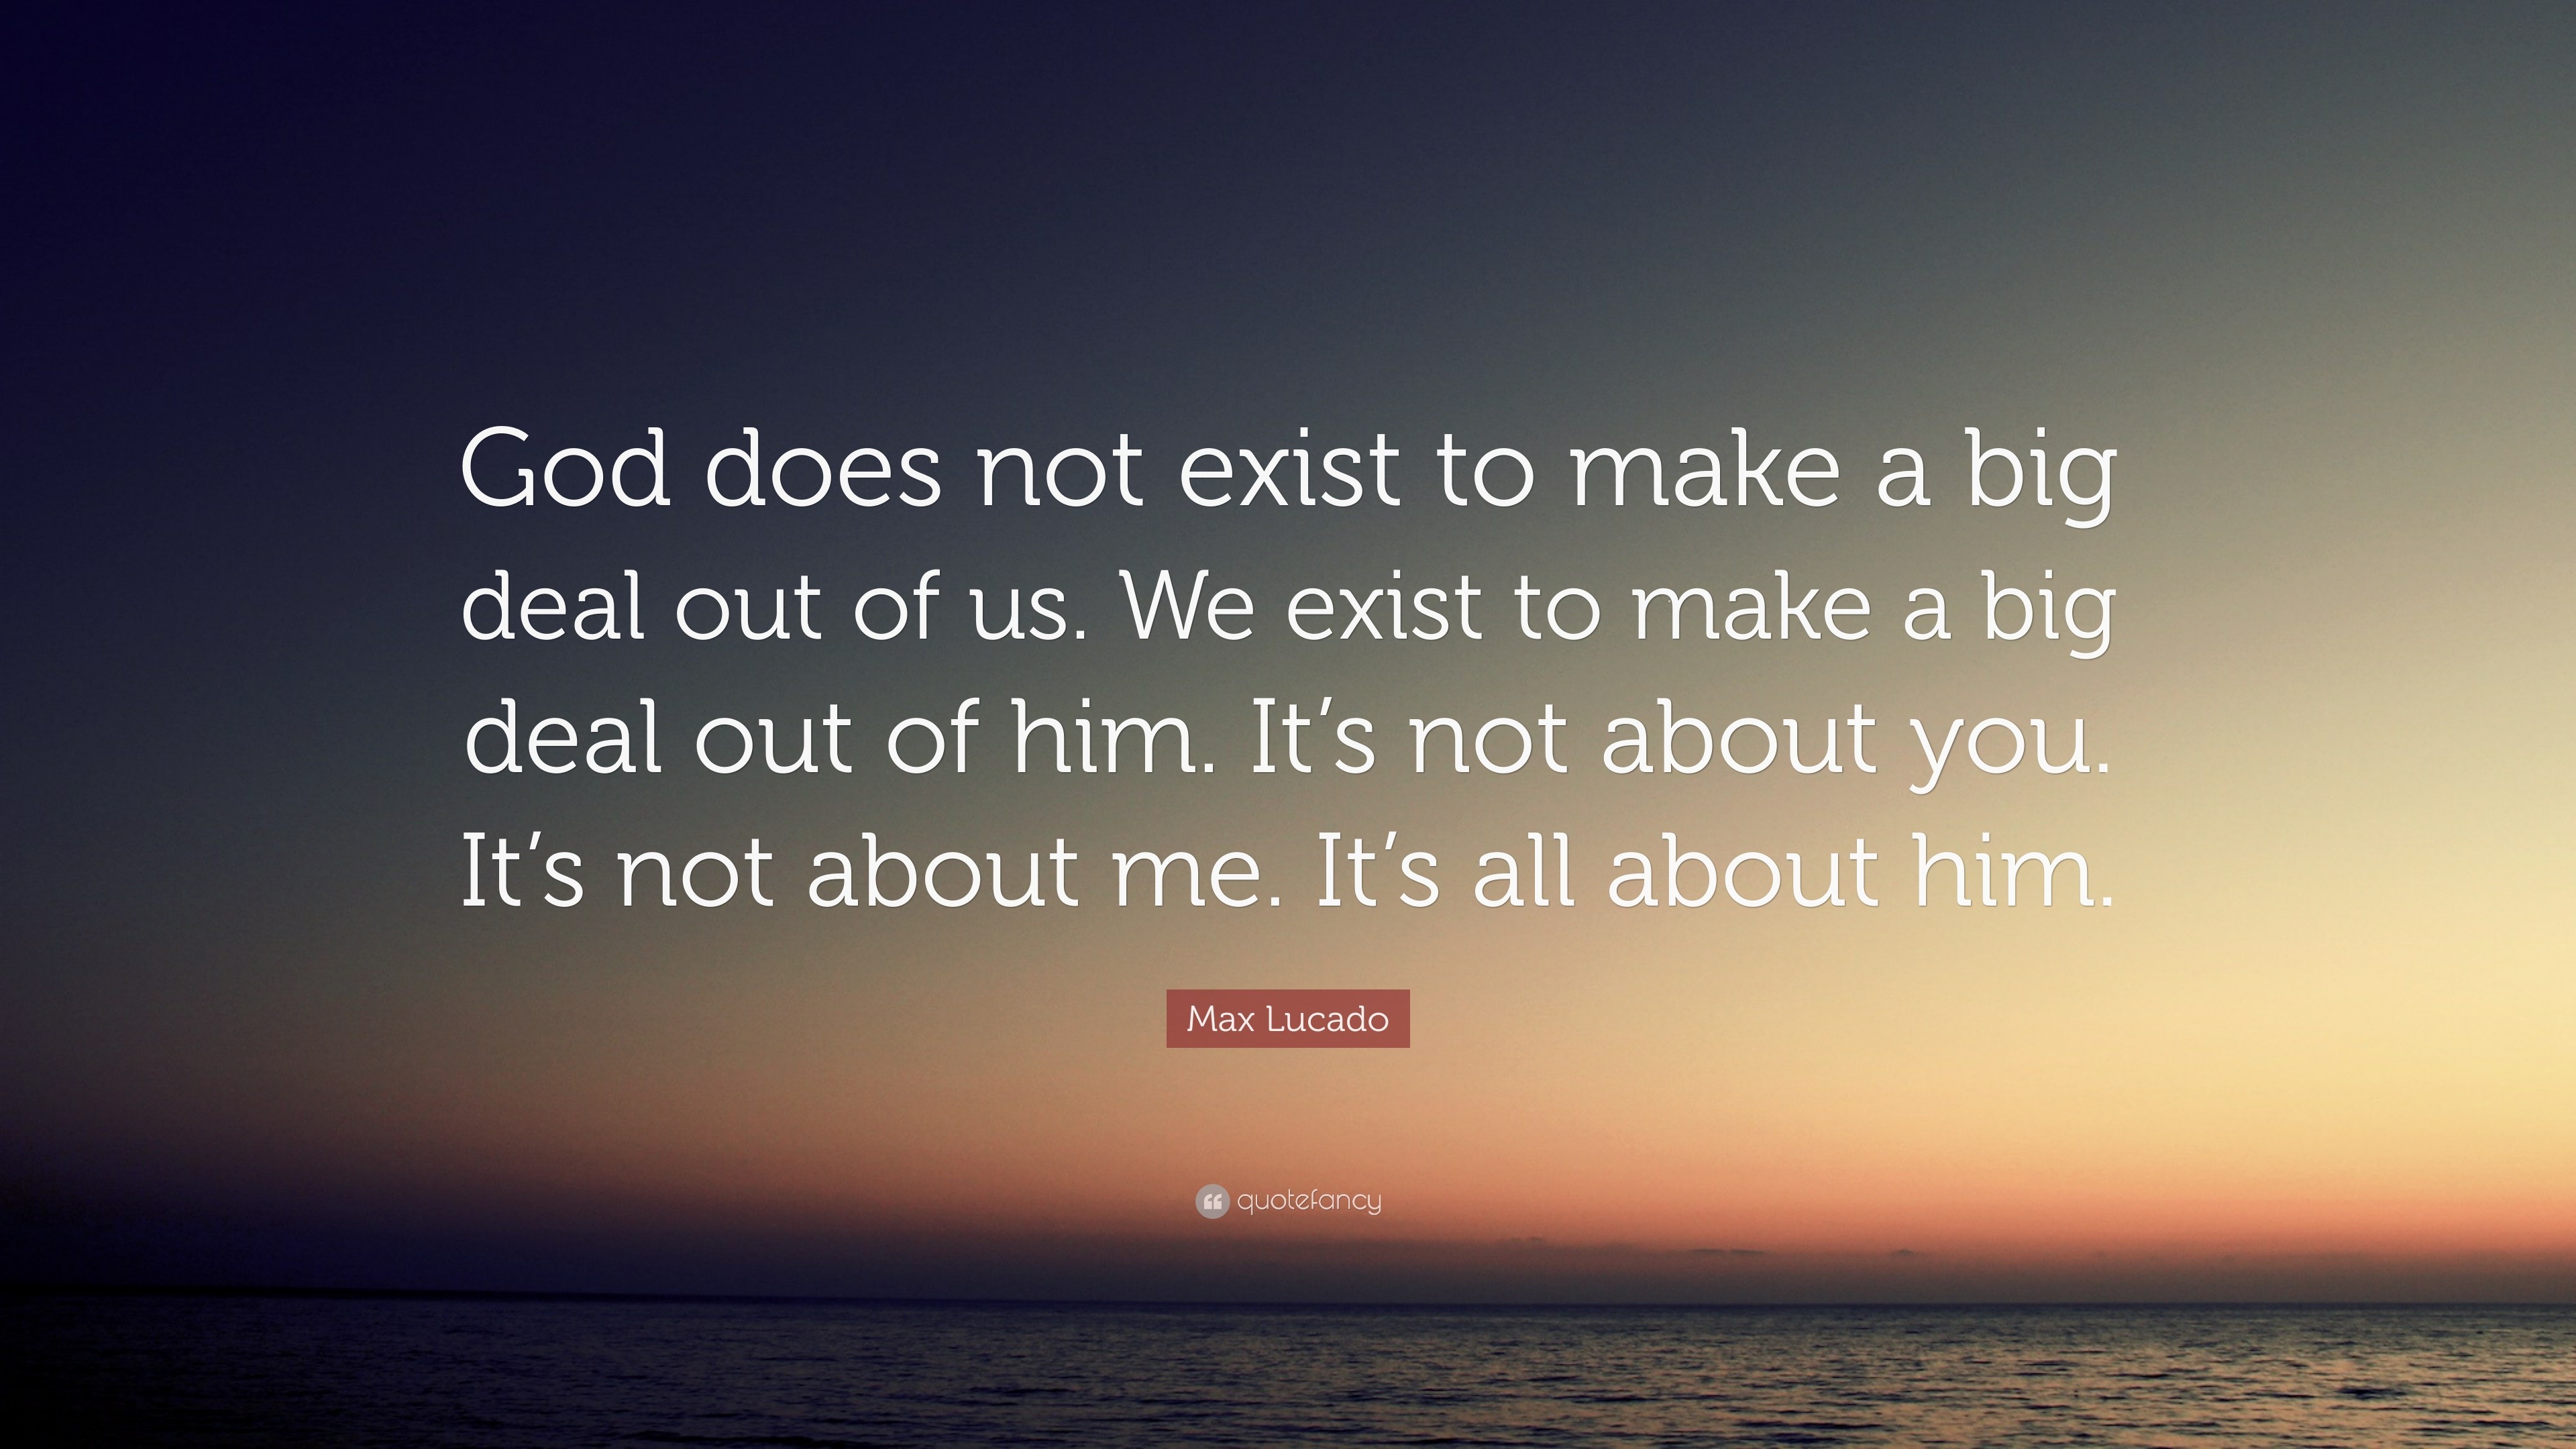 Max Lucado Quote: “God does not exist to make a big deal out of us. We